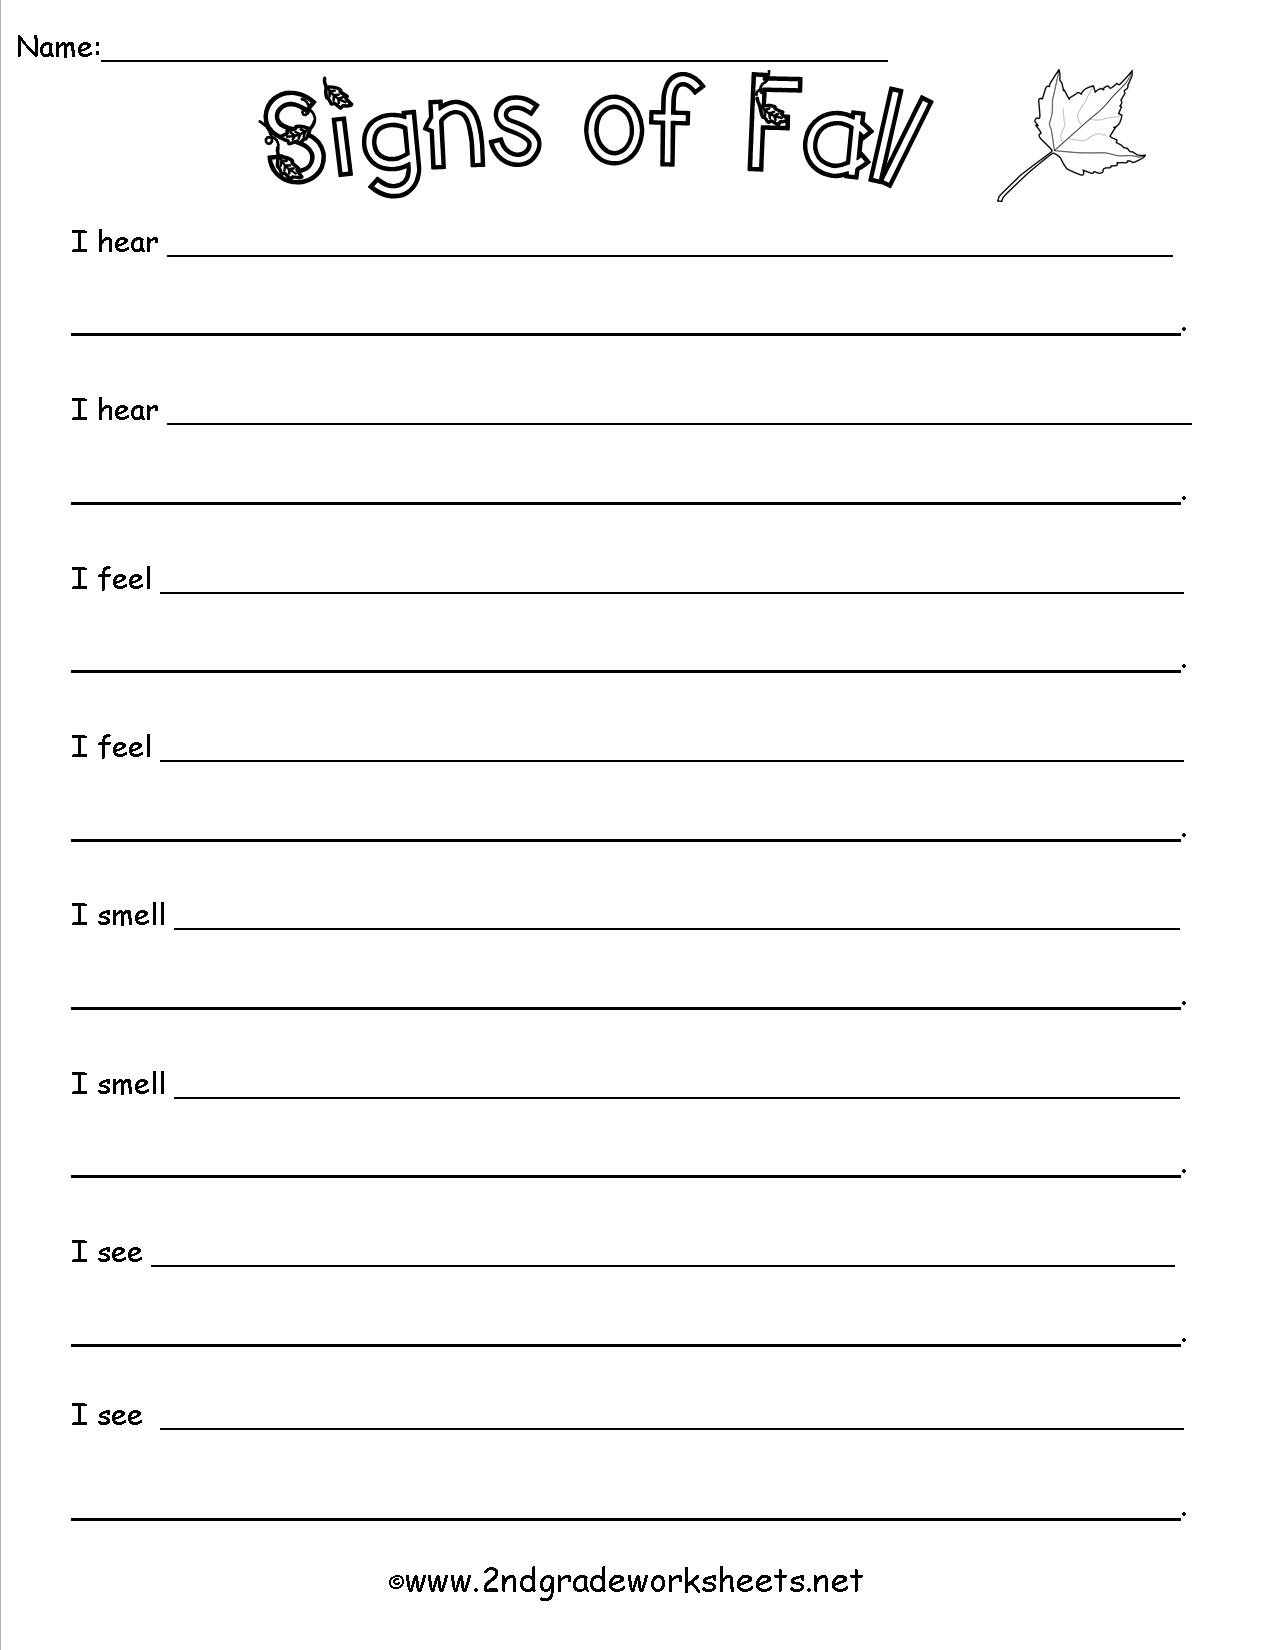 Free Math Worksheets Fourth Grade 4 Addition Adding Three 2 Digit Numbers Mental